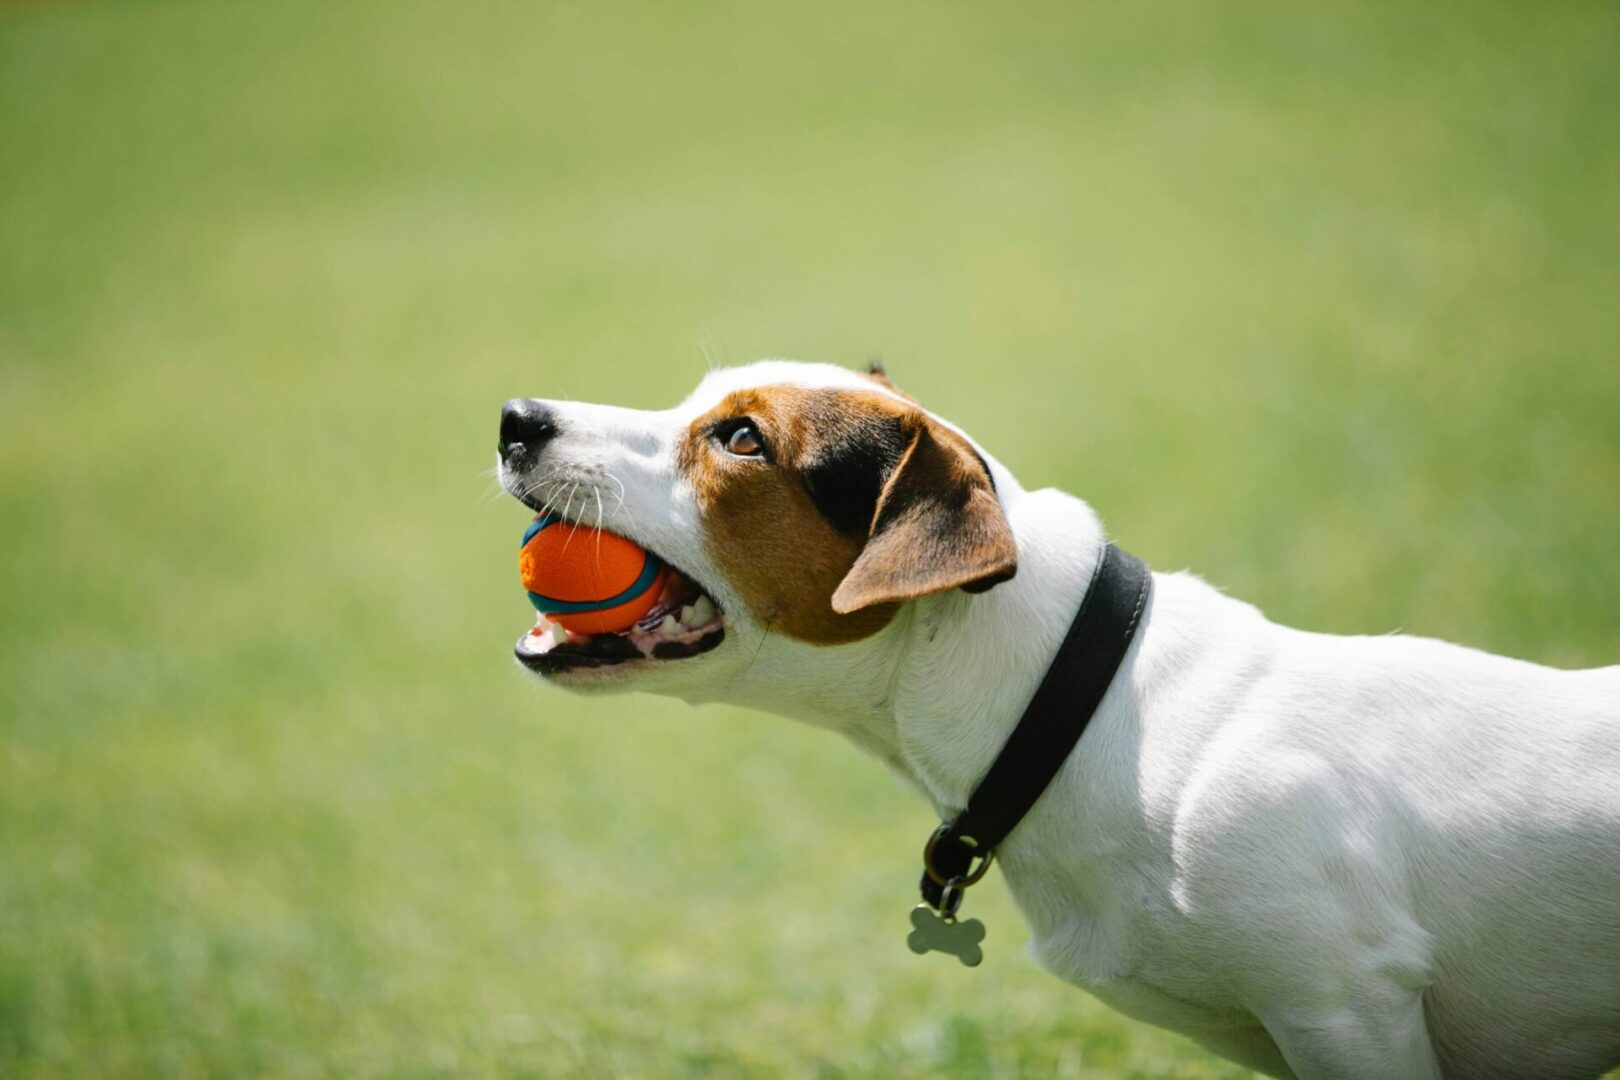 A dog with a ball in its mouth.